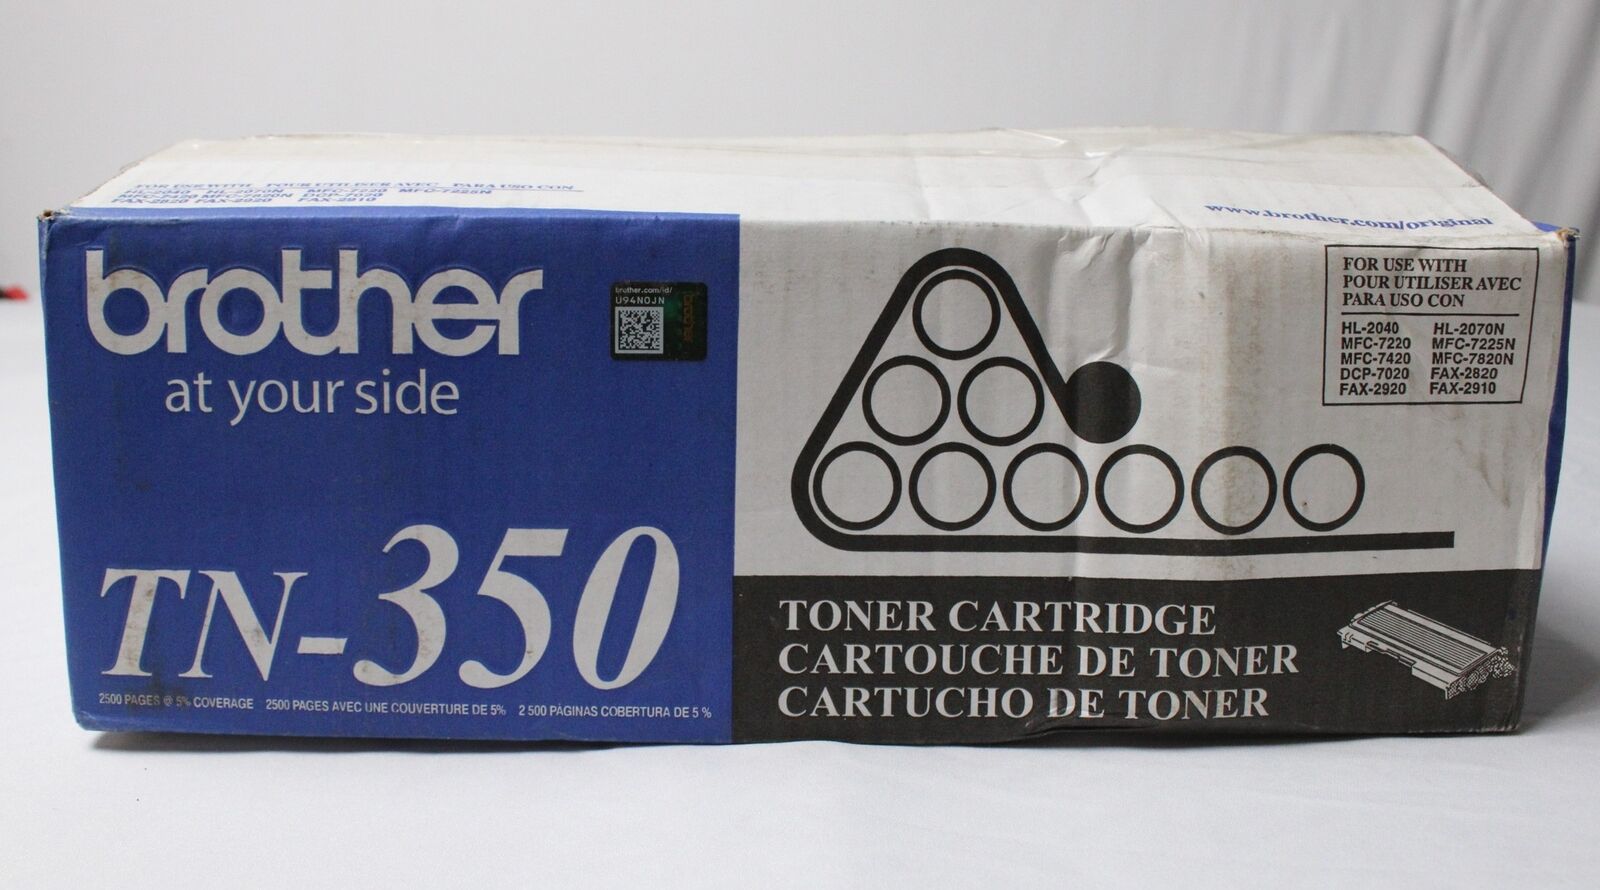 Brother At Your Side TN350 Up To 2,500 Pages Black Toner Cartridge EG7